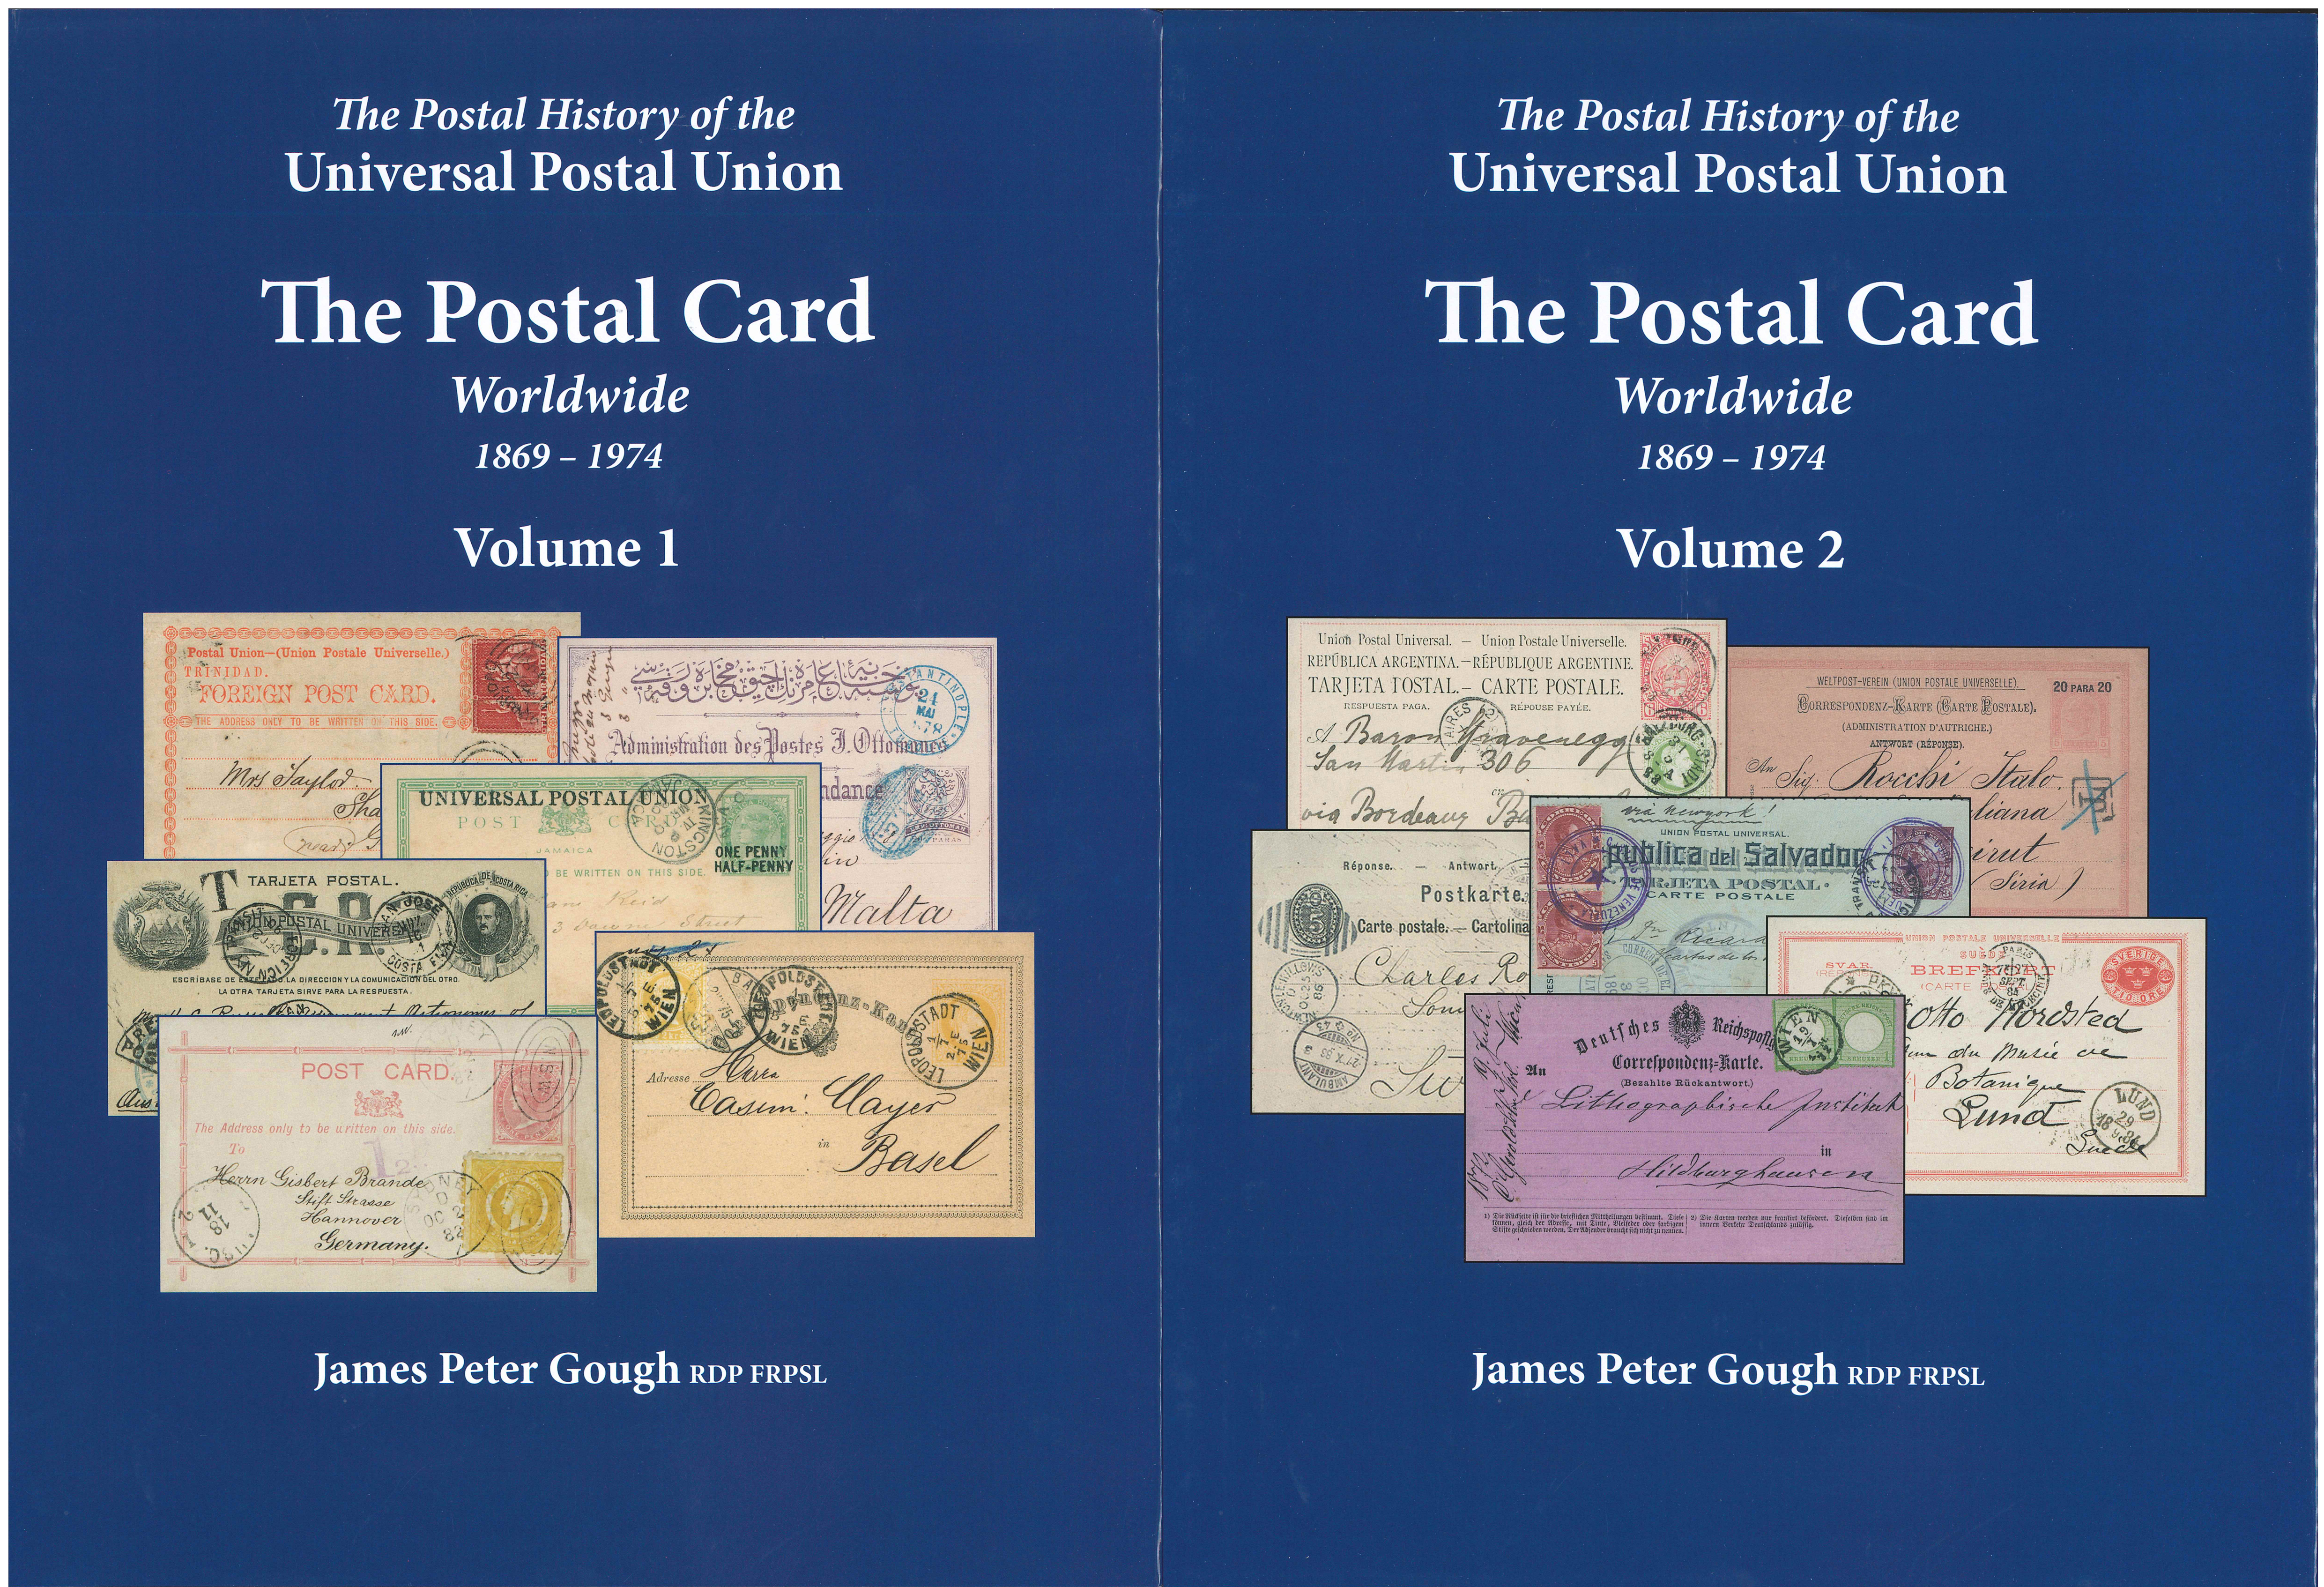  Gough, Peter The Postal History of the Universal Postal Union: 